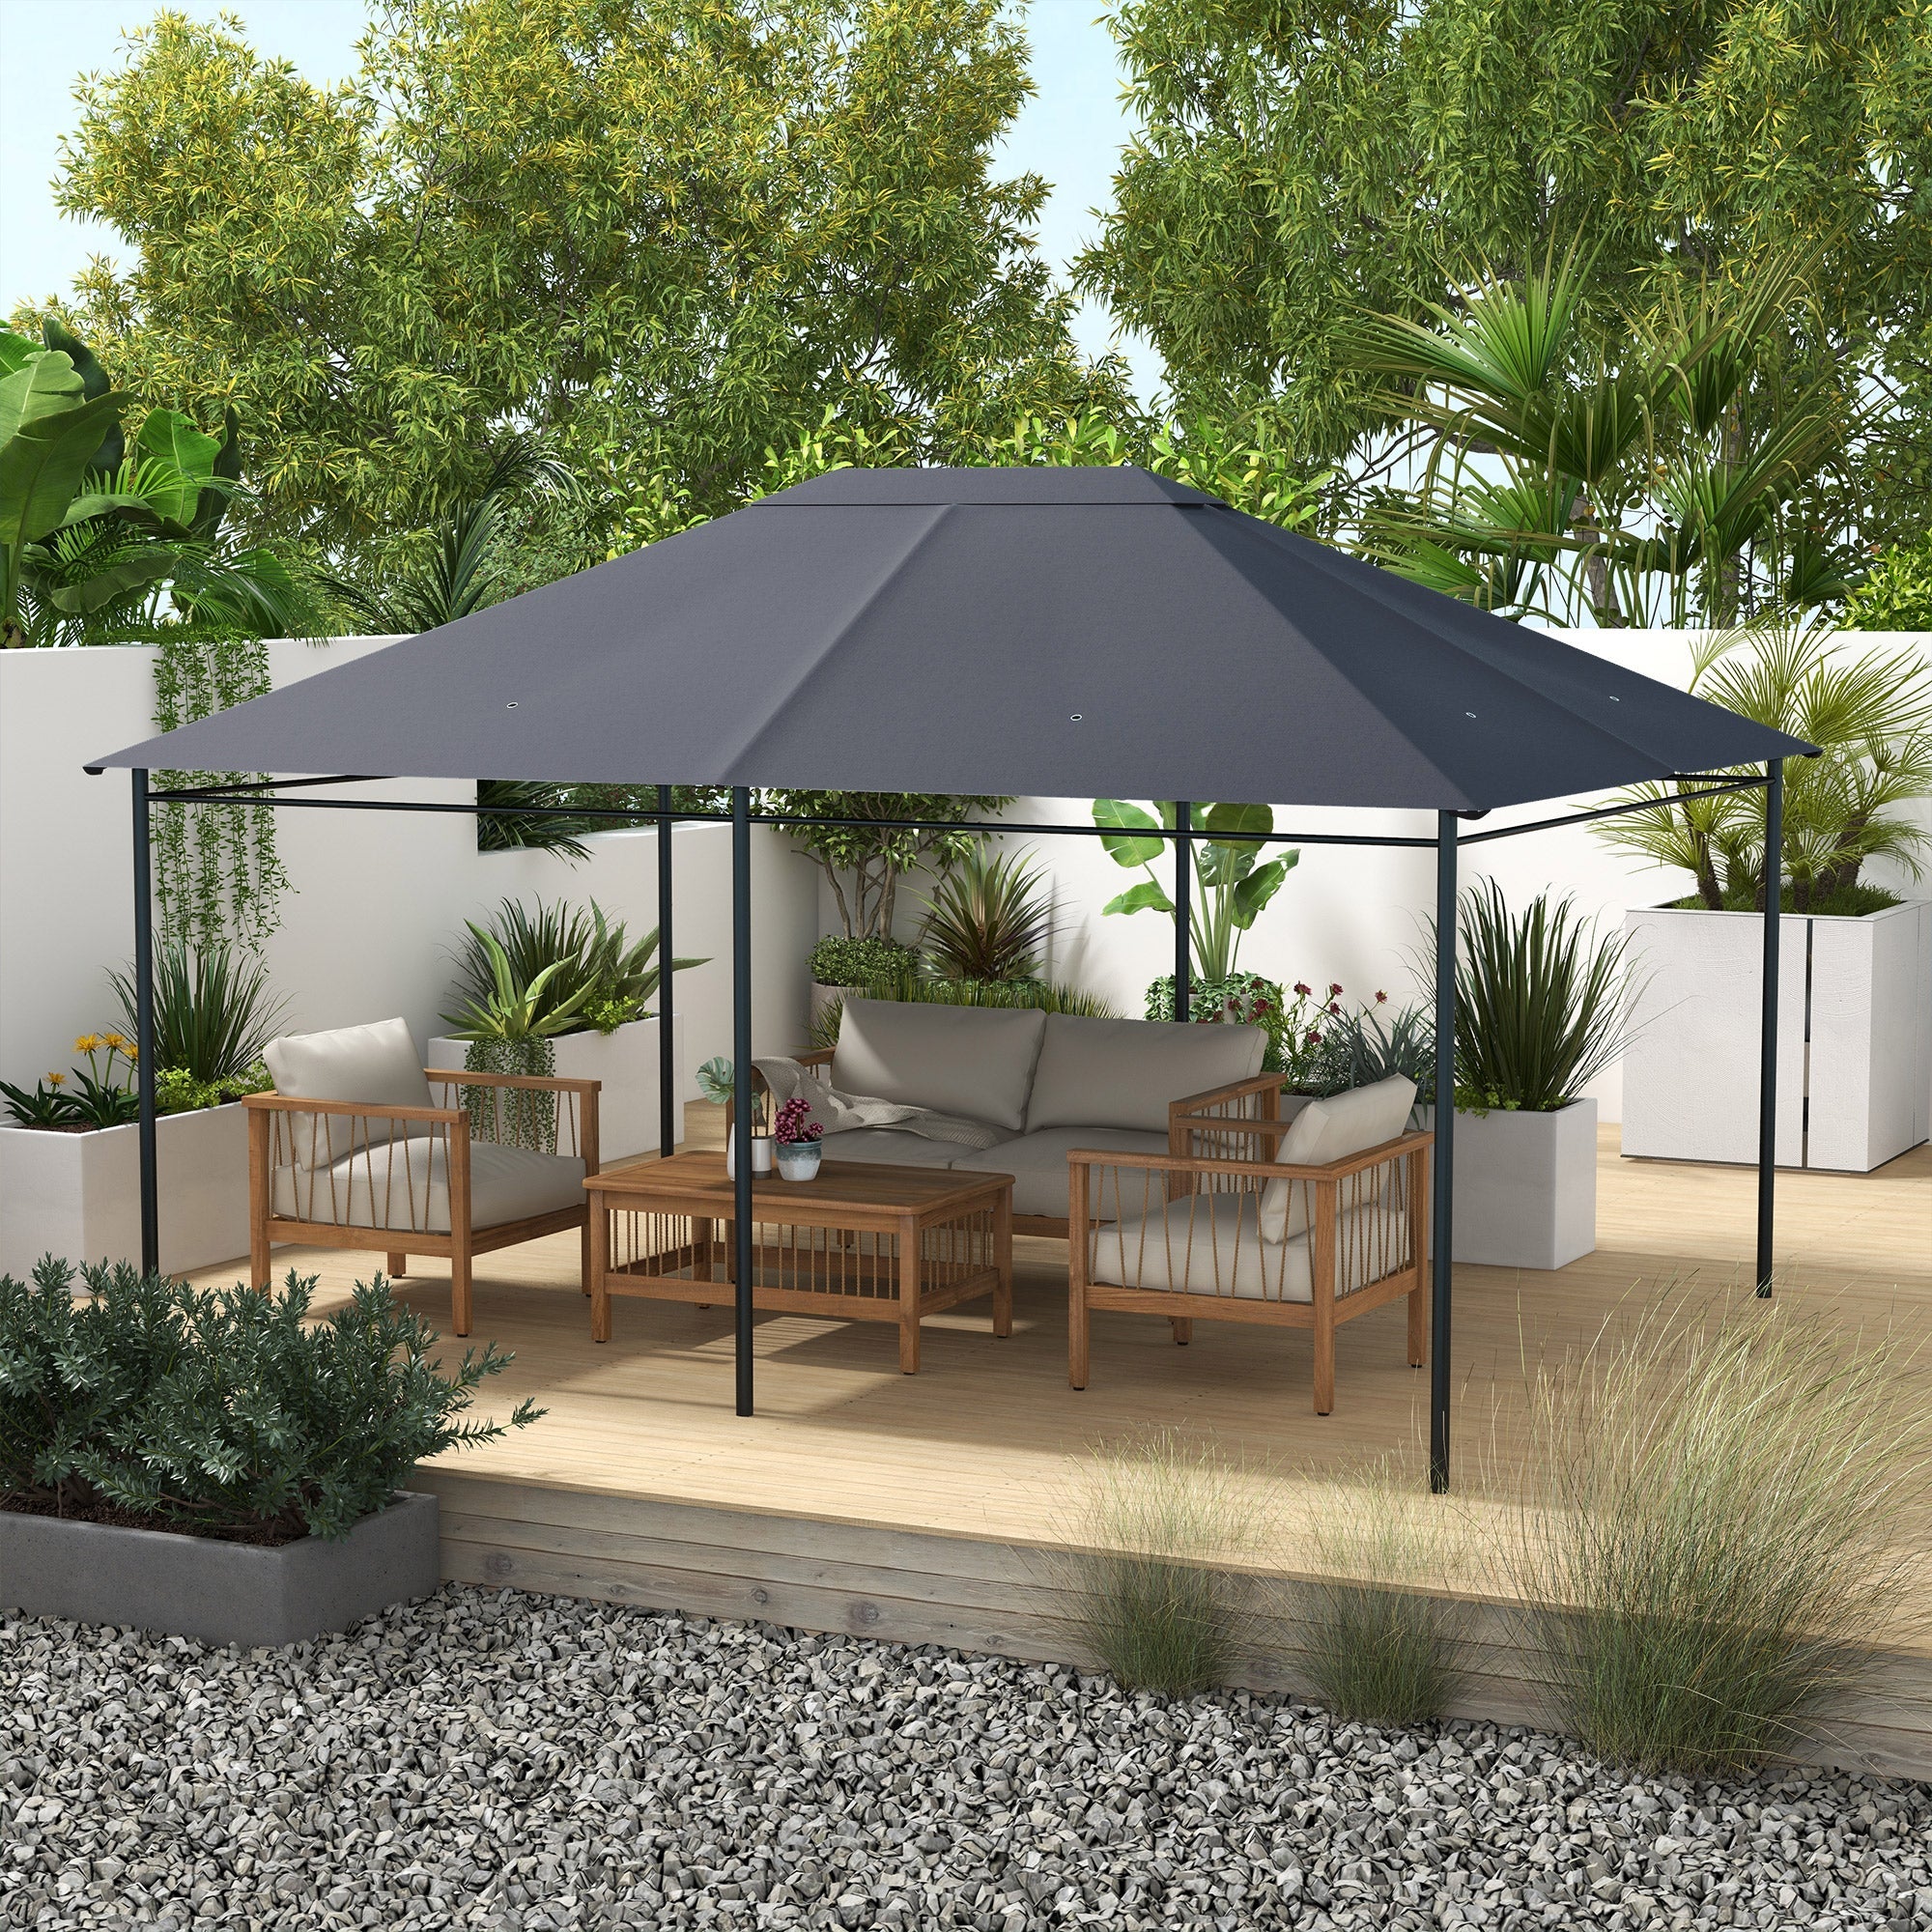 3 x 4m Gazebo Canopy Replacement Cover, Gazebo Roof Replacement (TOP COVER ONLY), Dark Grey-1